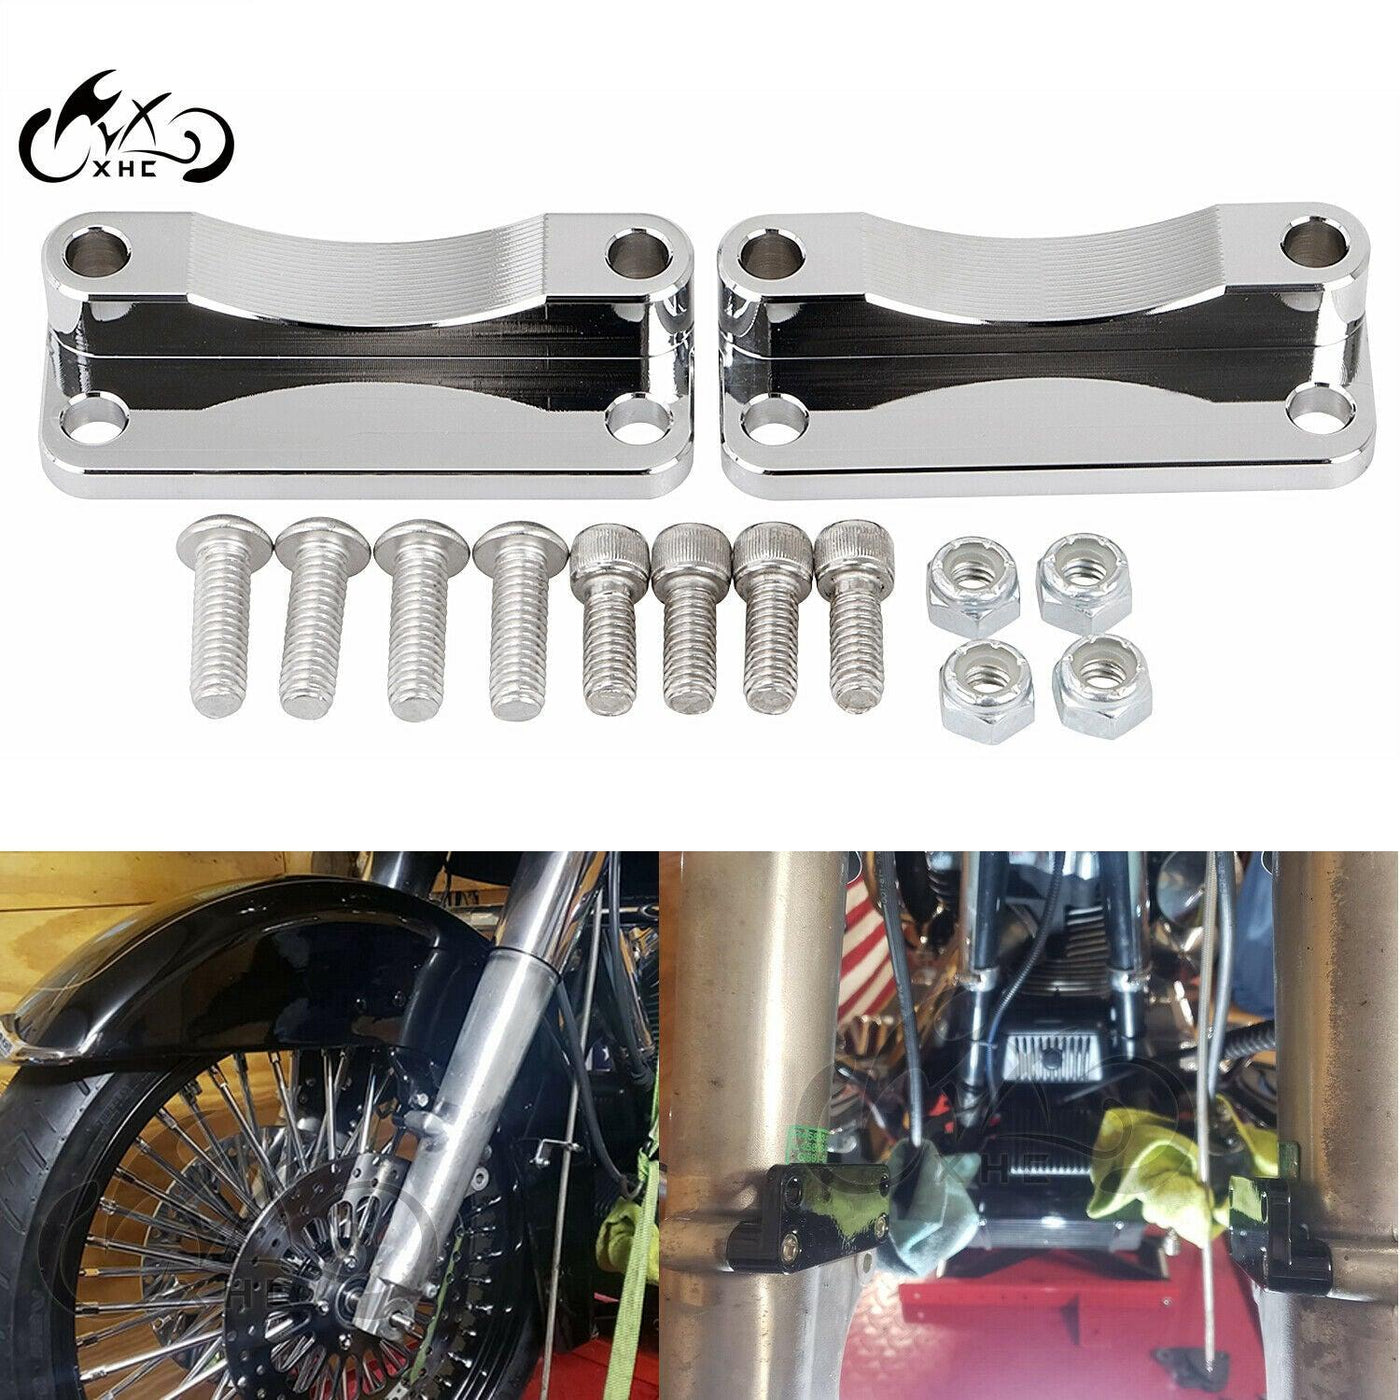 Chrome CNC Front Fender Riser Relocator For Harley Touring FLHTCU 21" Tire Wheel - Moto Life Products